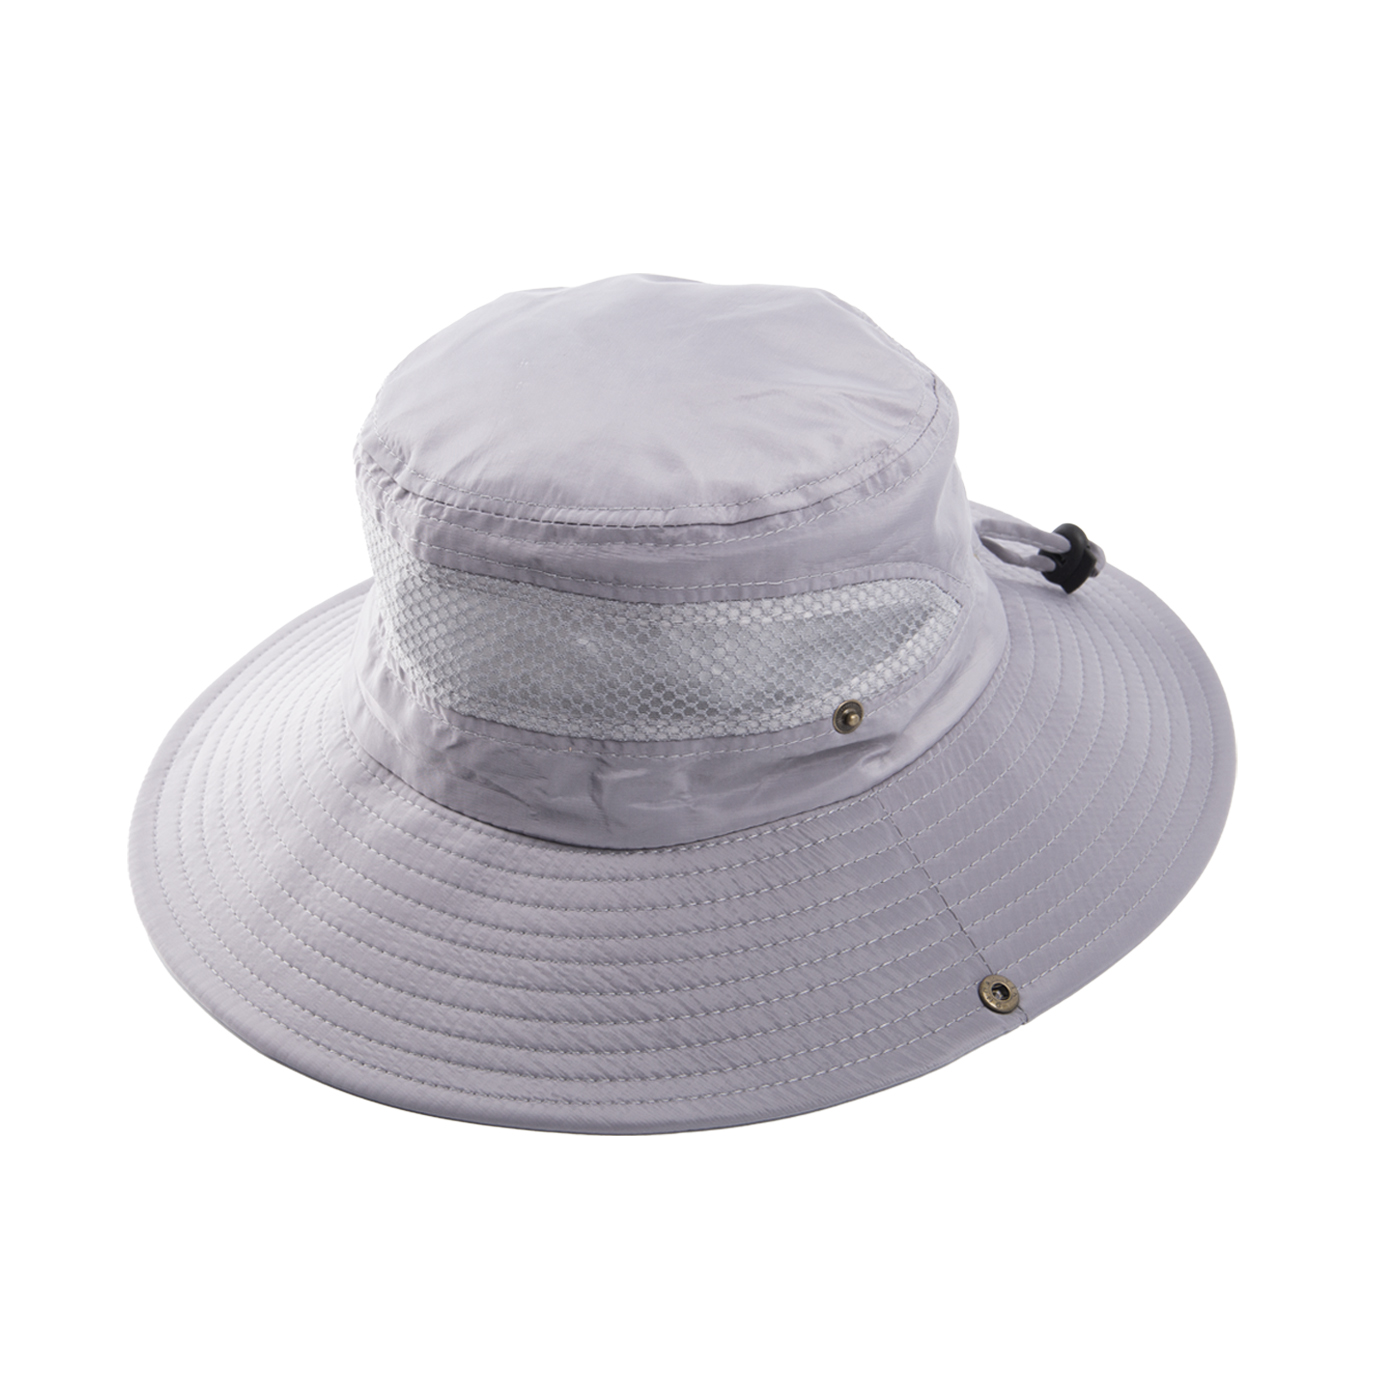 Mesh Breathable Fishing Boonie Hat With String2